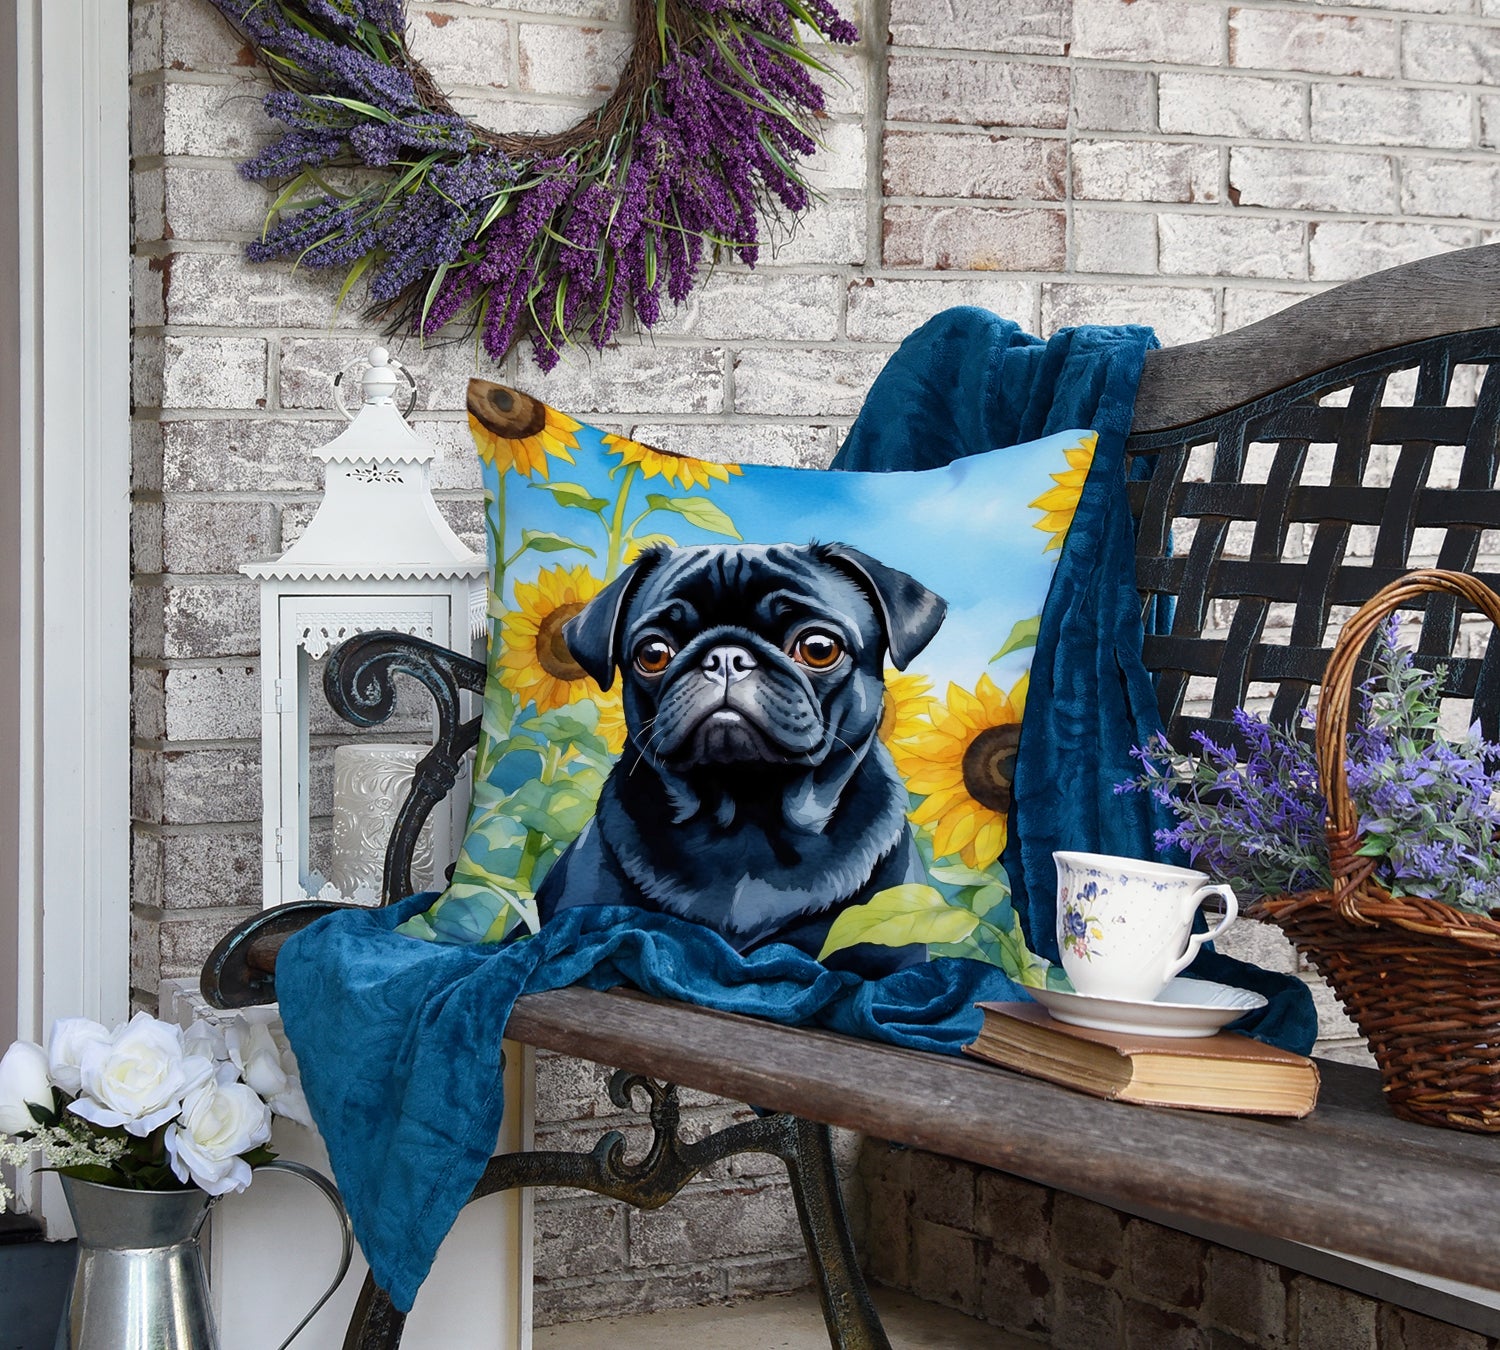 Pug in Sunflowers Throw Pillow